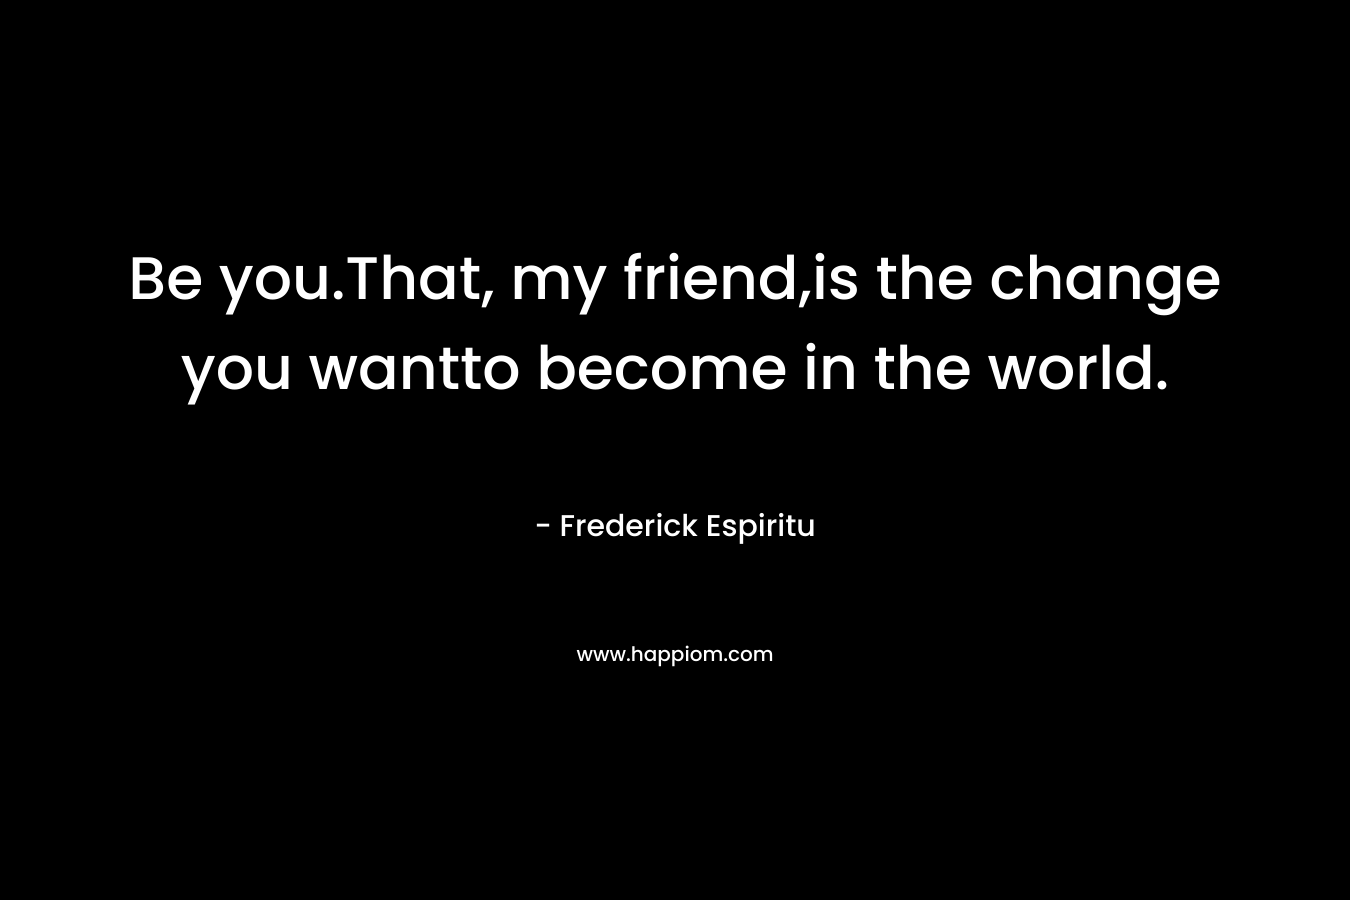 Be you.That, my friend,is the change you wantto become in the world. – Frederick Espiritu